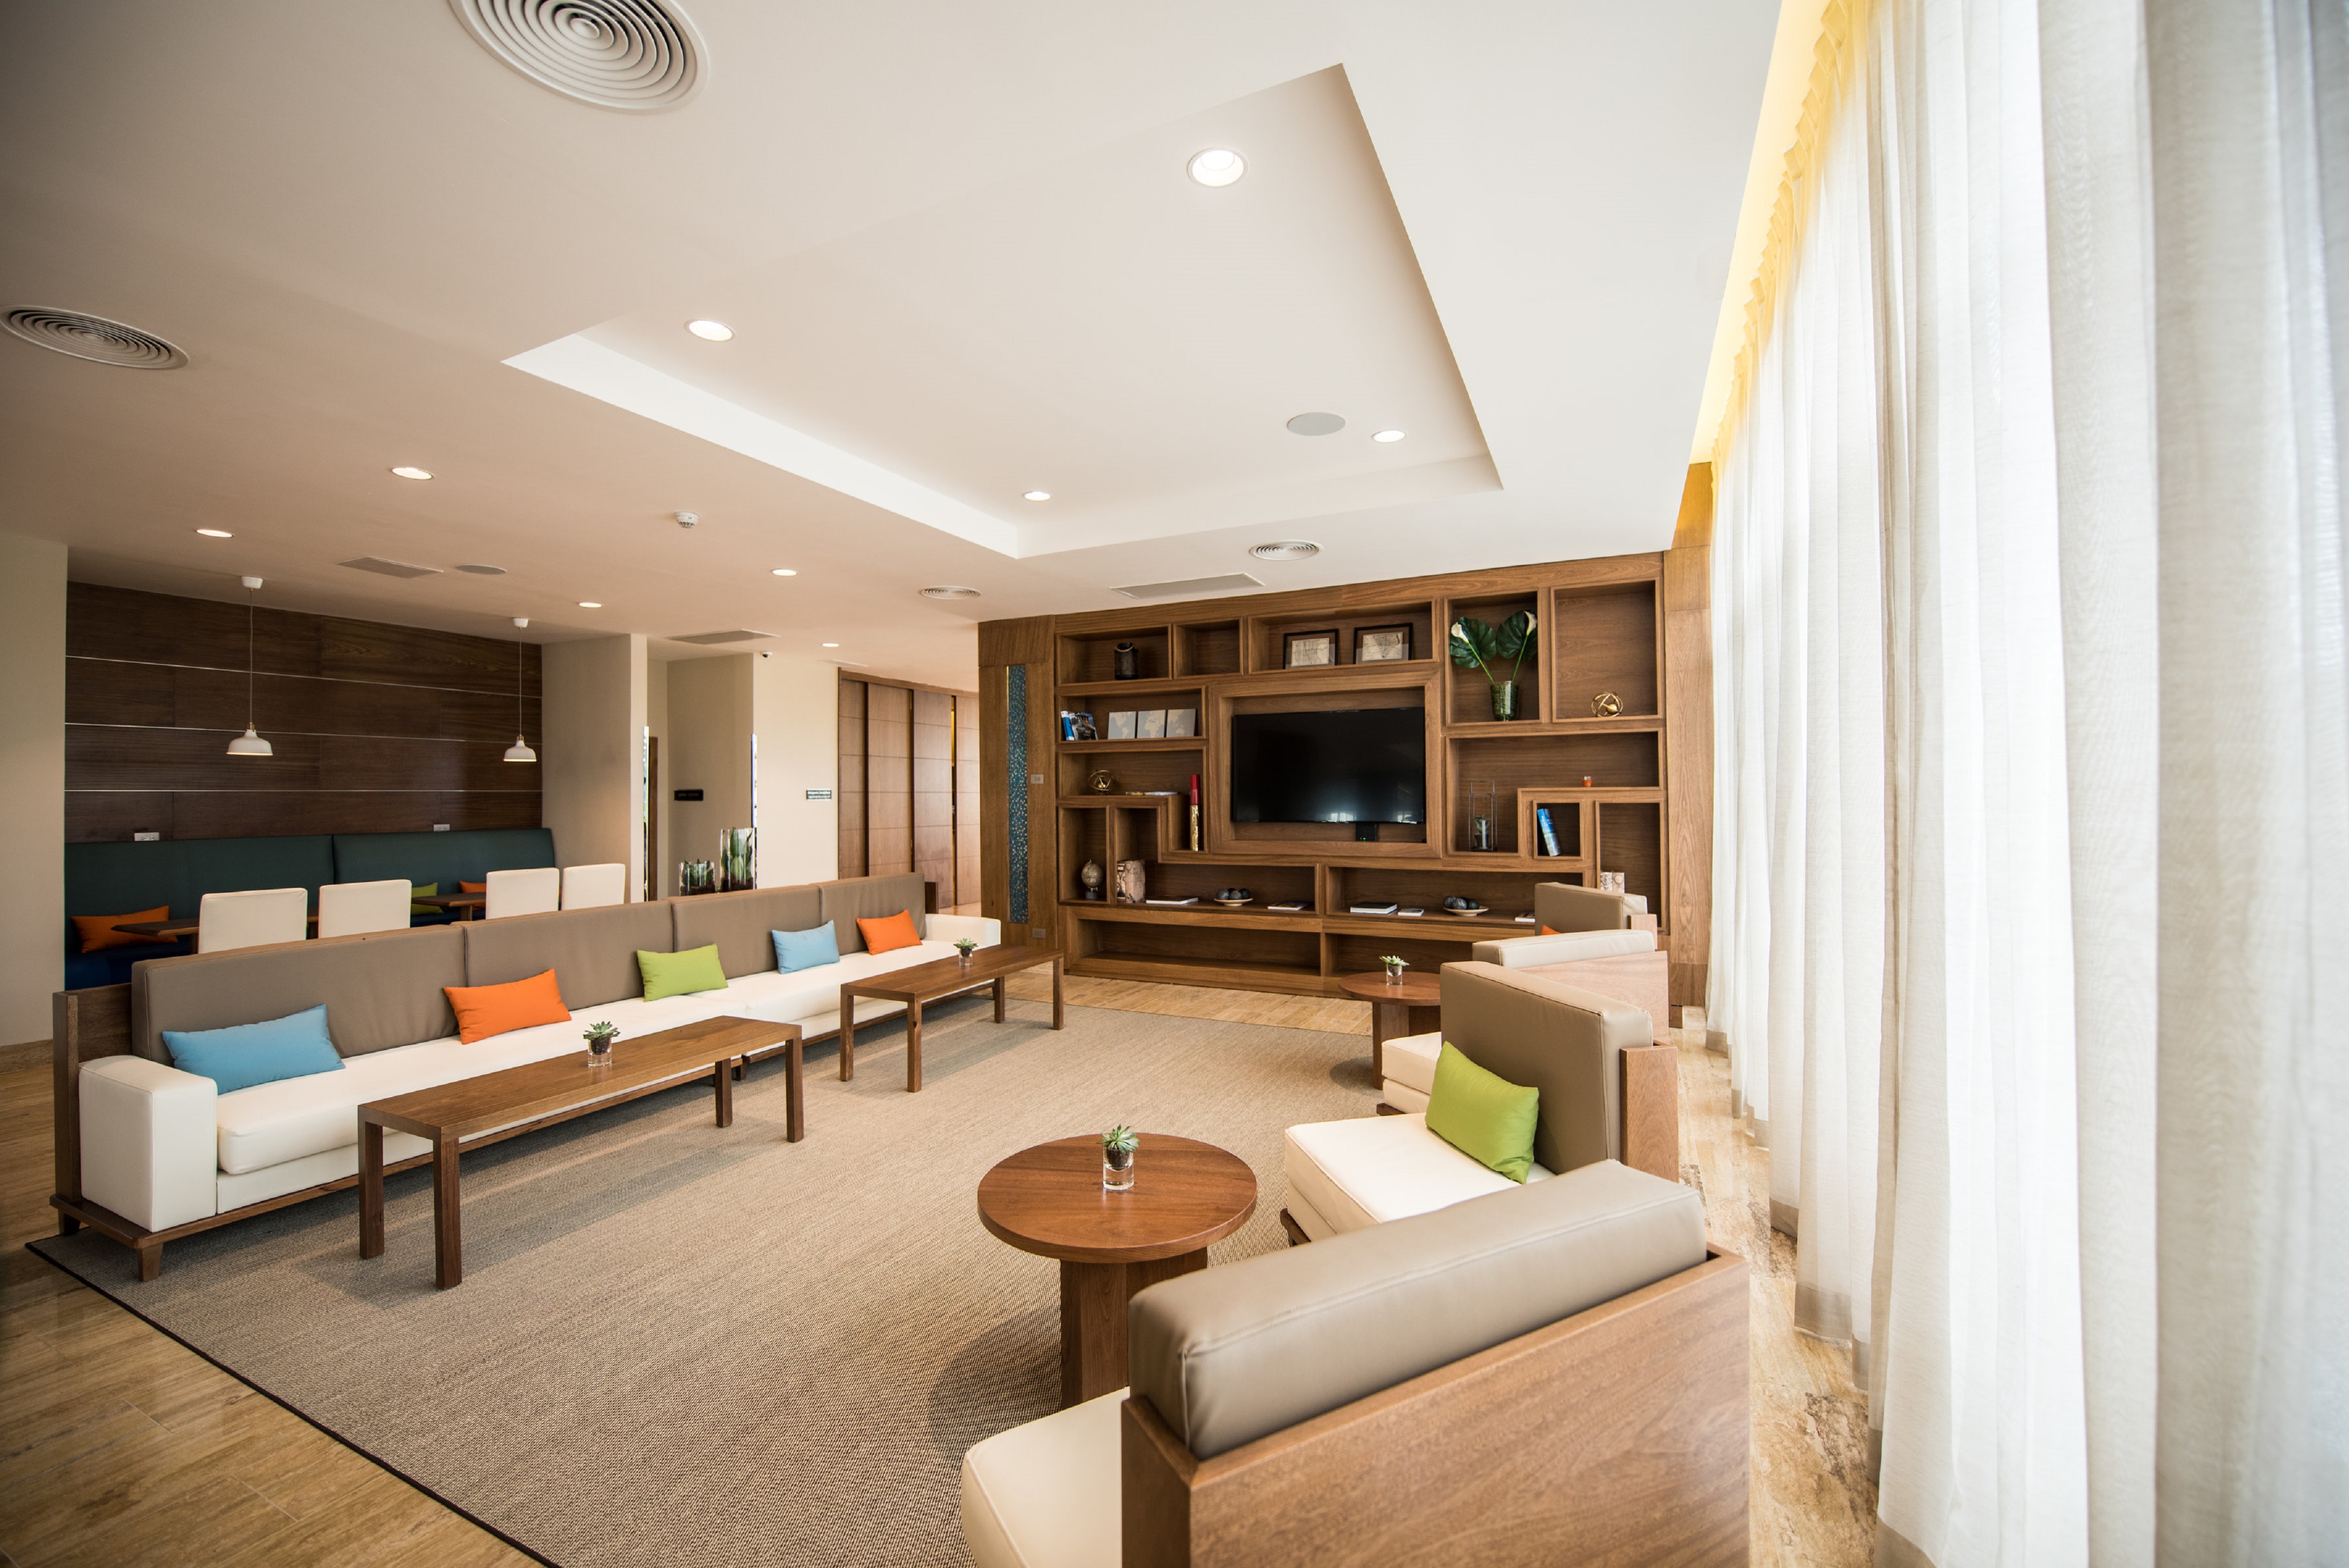 Lobby Seating Area with Soft Seats, Coffee Tables and Wall Mounted HDTV